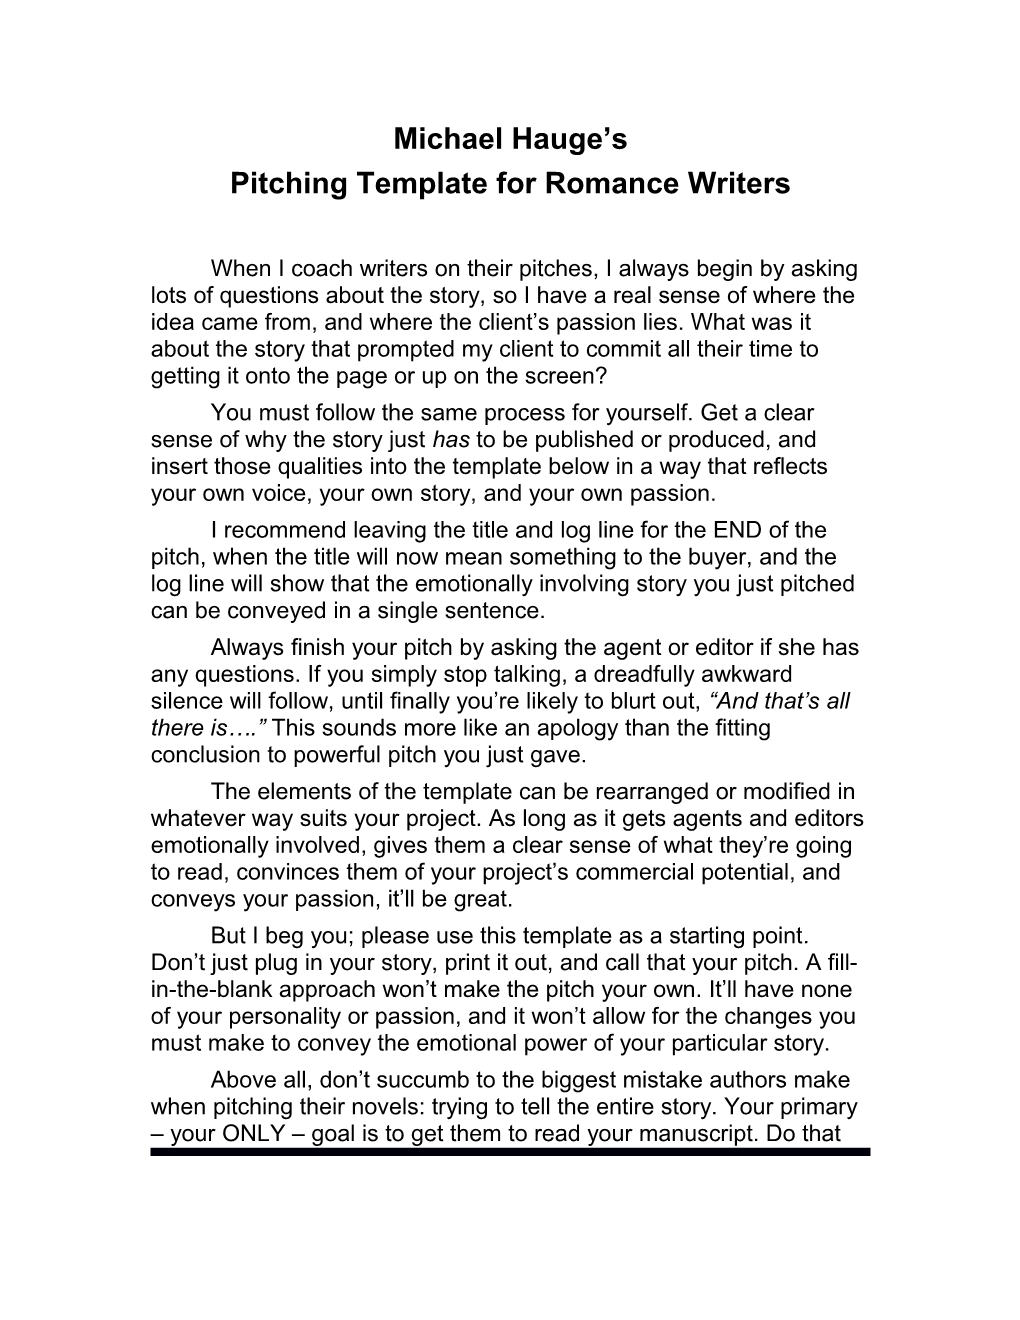 Pitching Template for Romance Writers